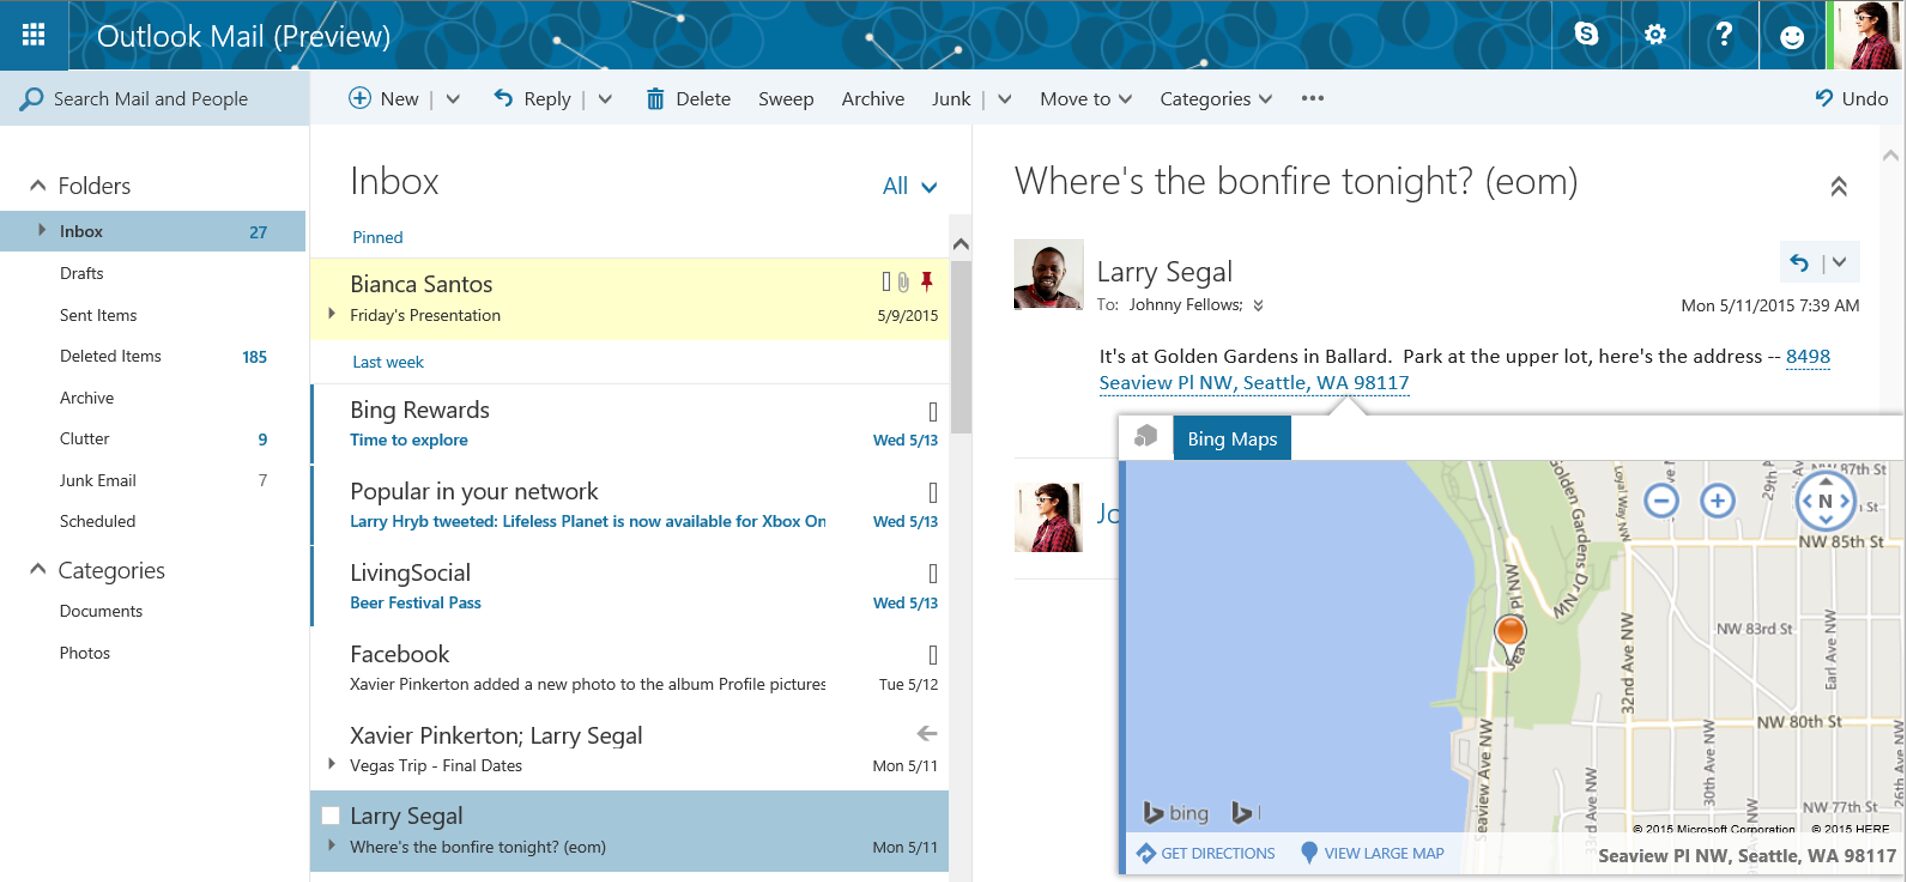 Outlook.com now has a built-in translator